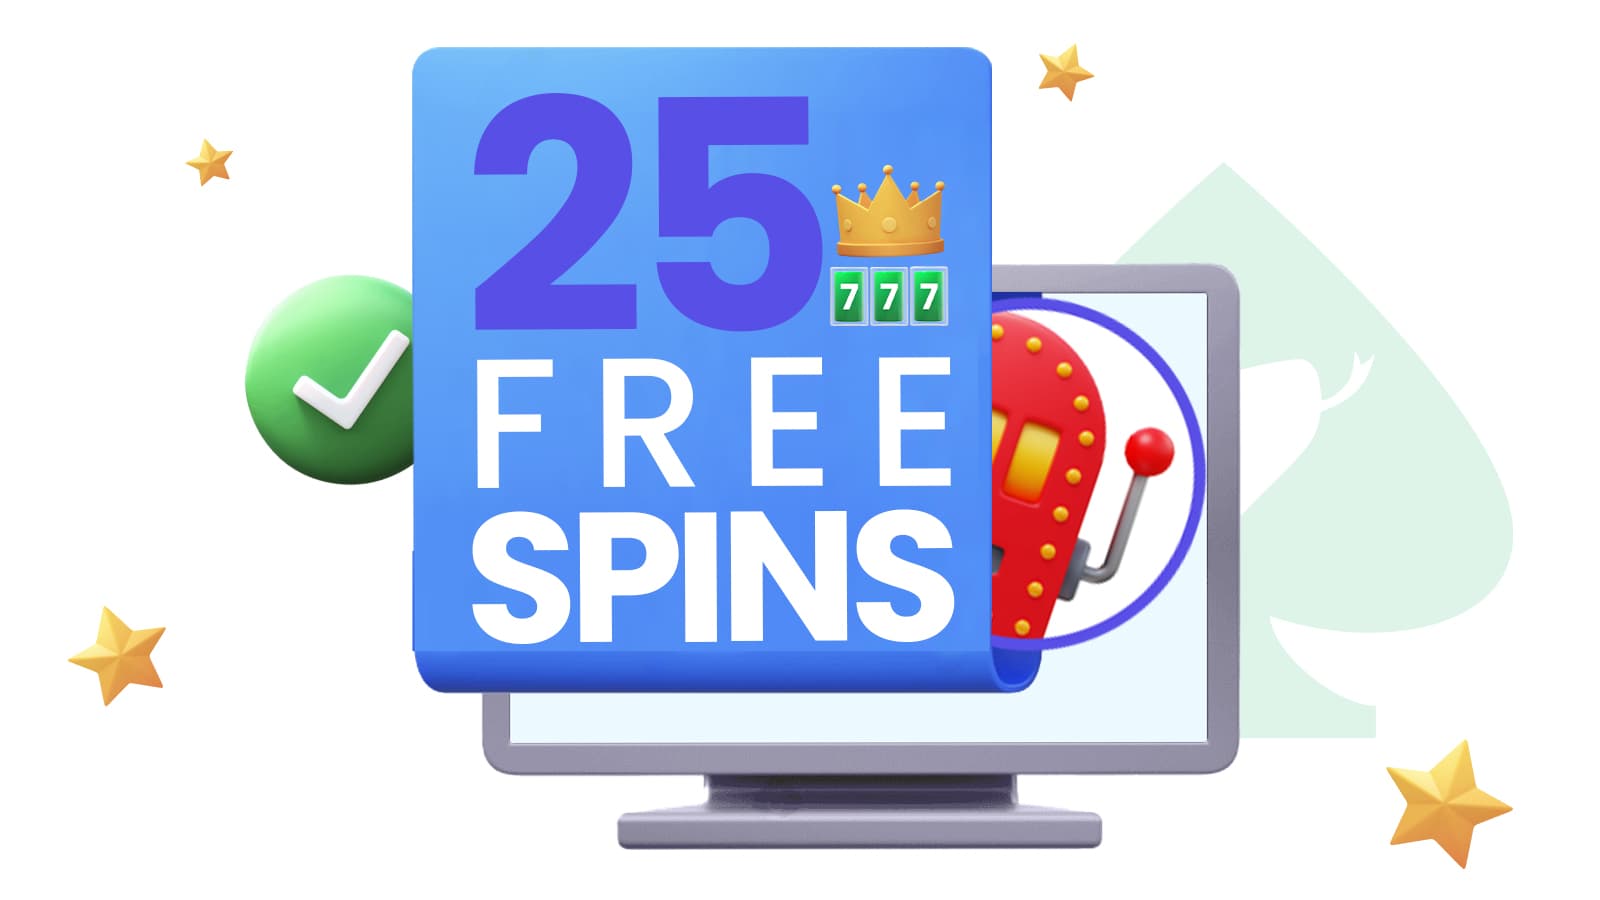 25 Free Spins